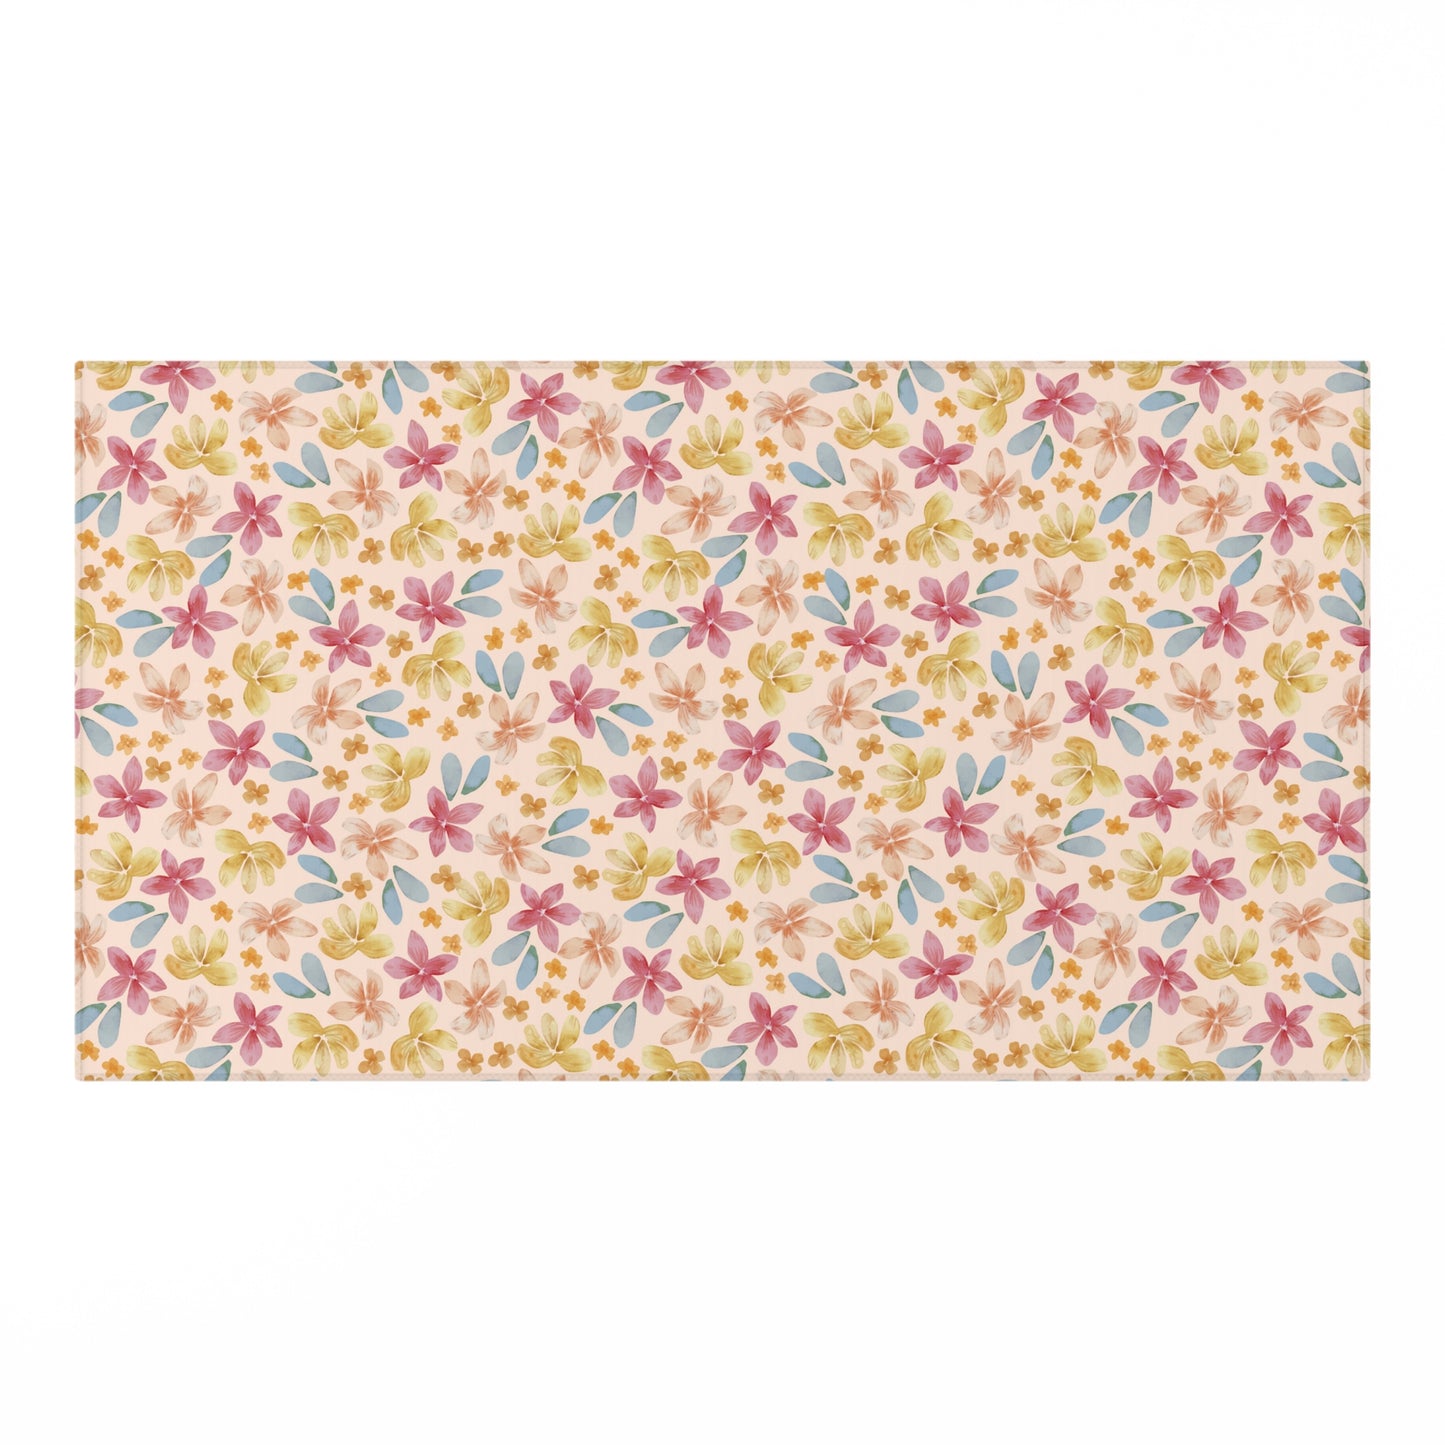 Niccie's Floral Pattern Picnic Rug: Durable Outdoor Mat & Picnic Blanket